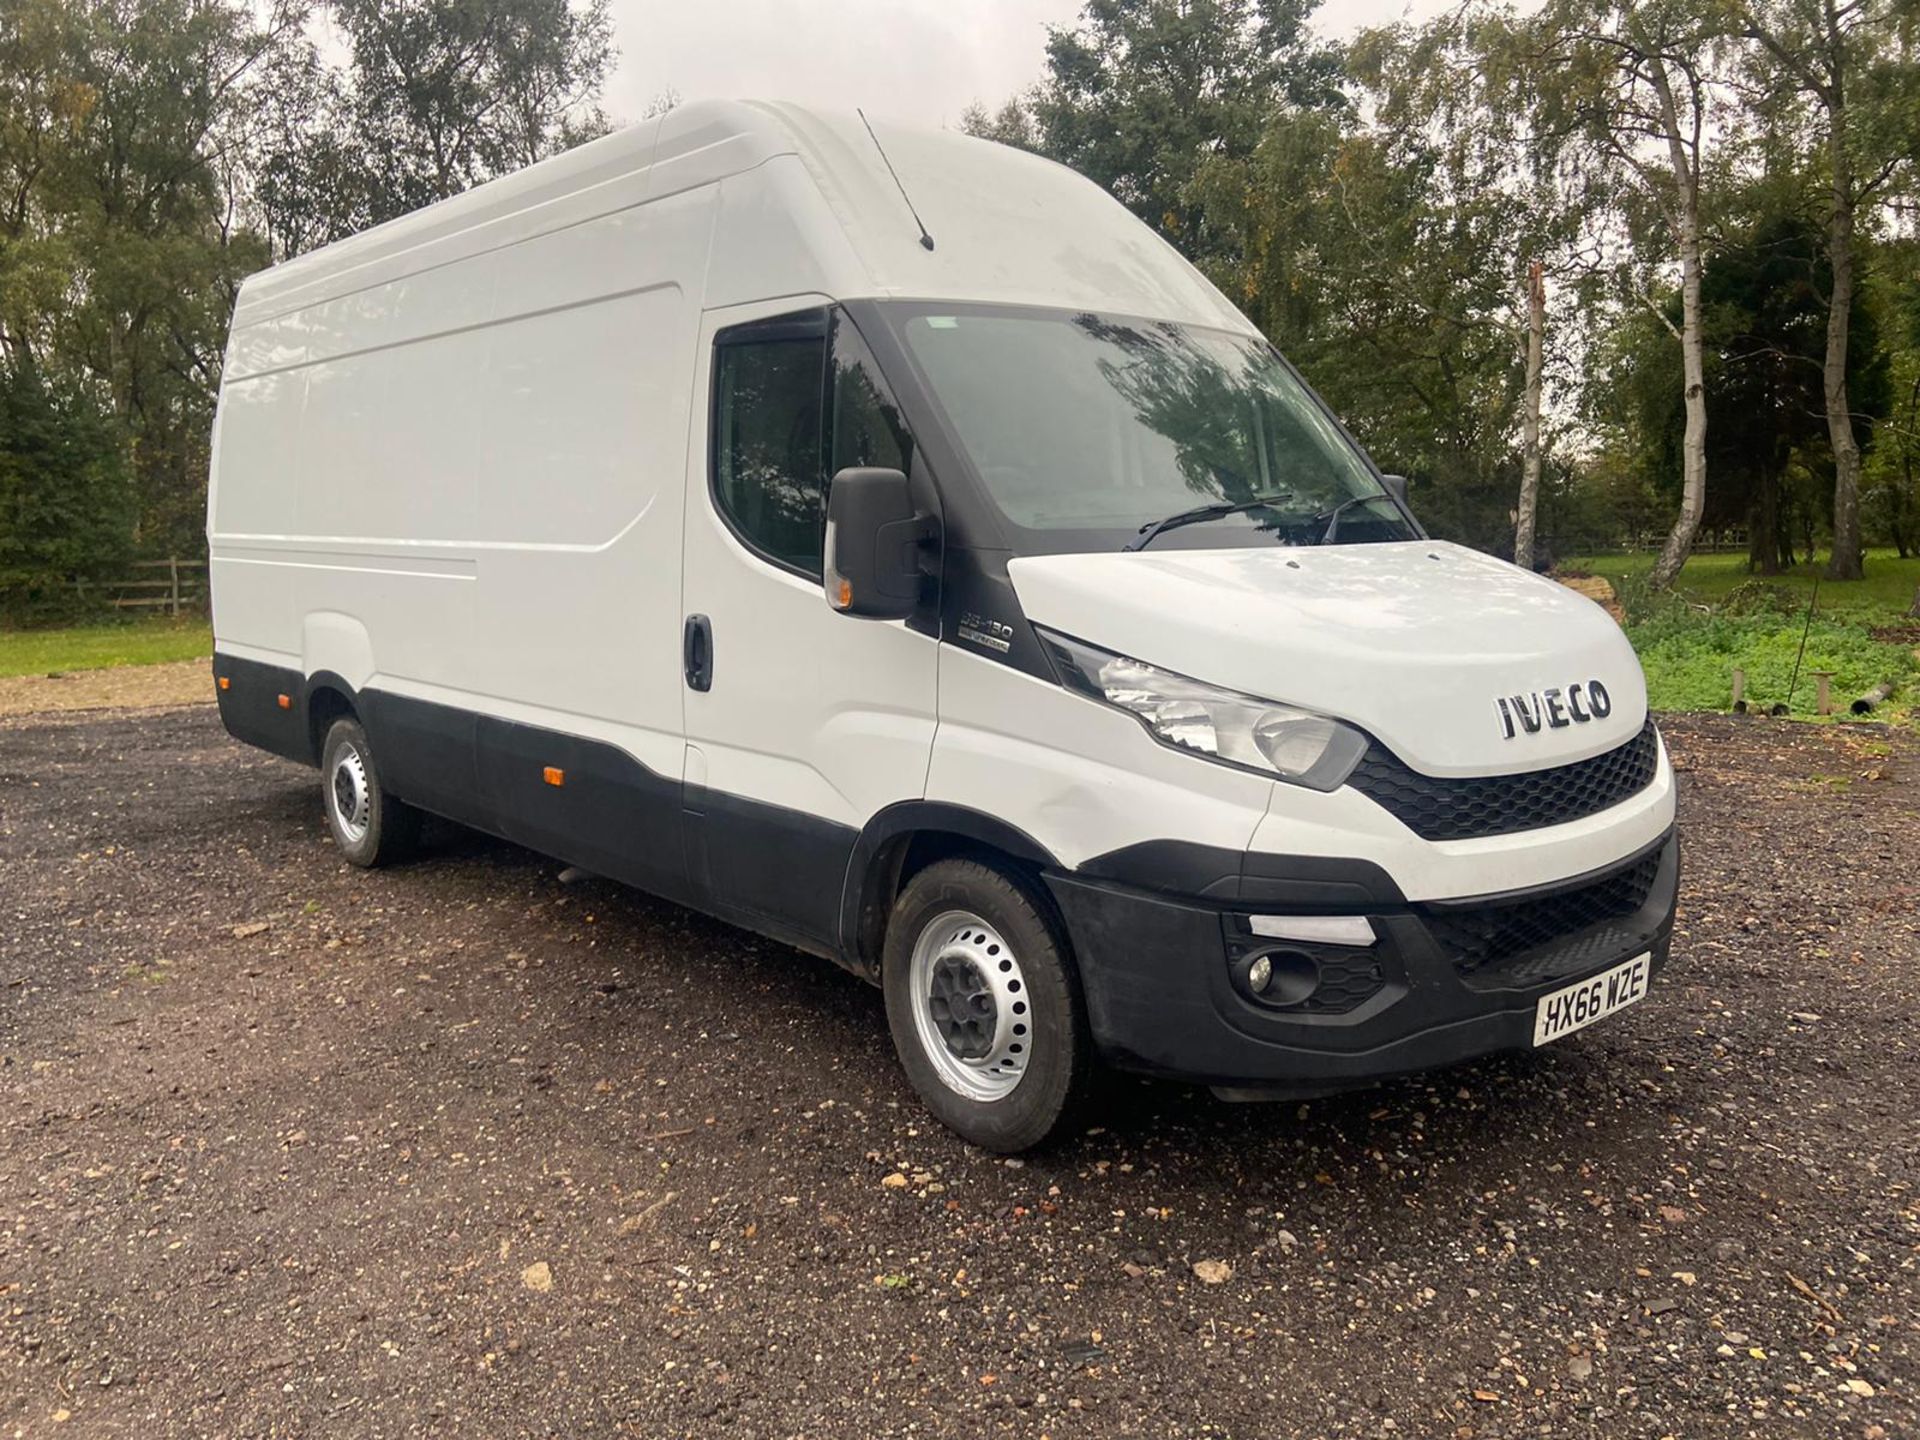 2016/66 REG IVECO DAILY 35S13 XLWB 2.3 DIESEL WHITE PANEL VAN, SHOWING 0 FORMER KEEPERS *NO VAT*